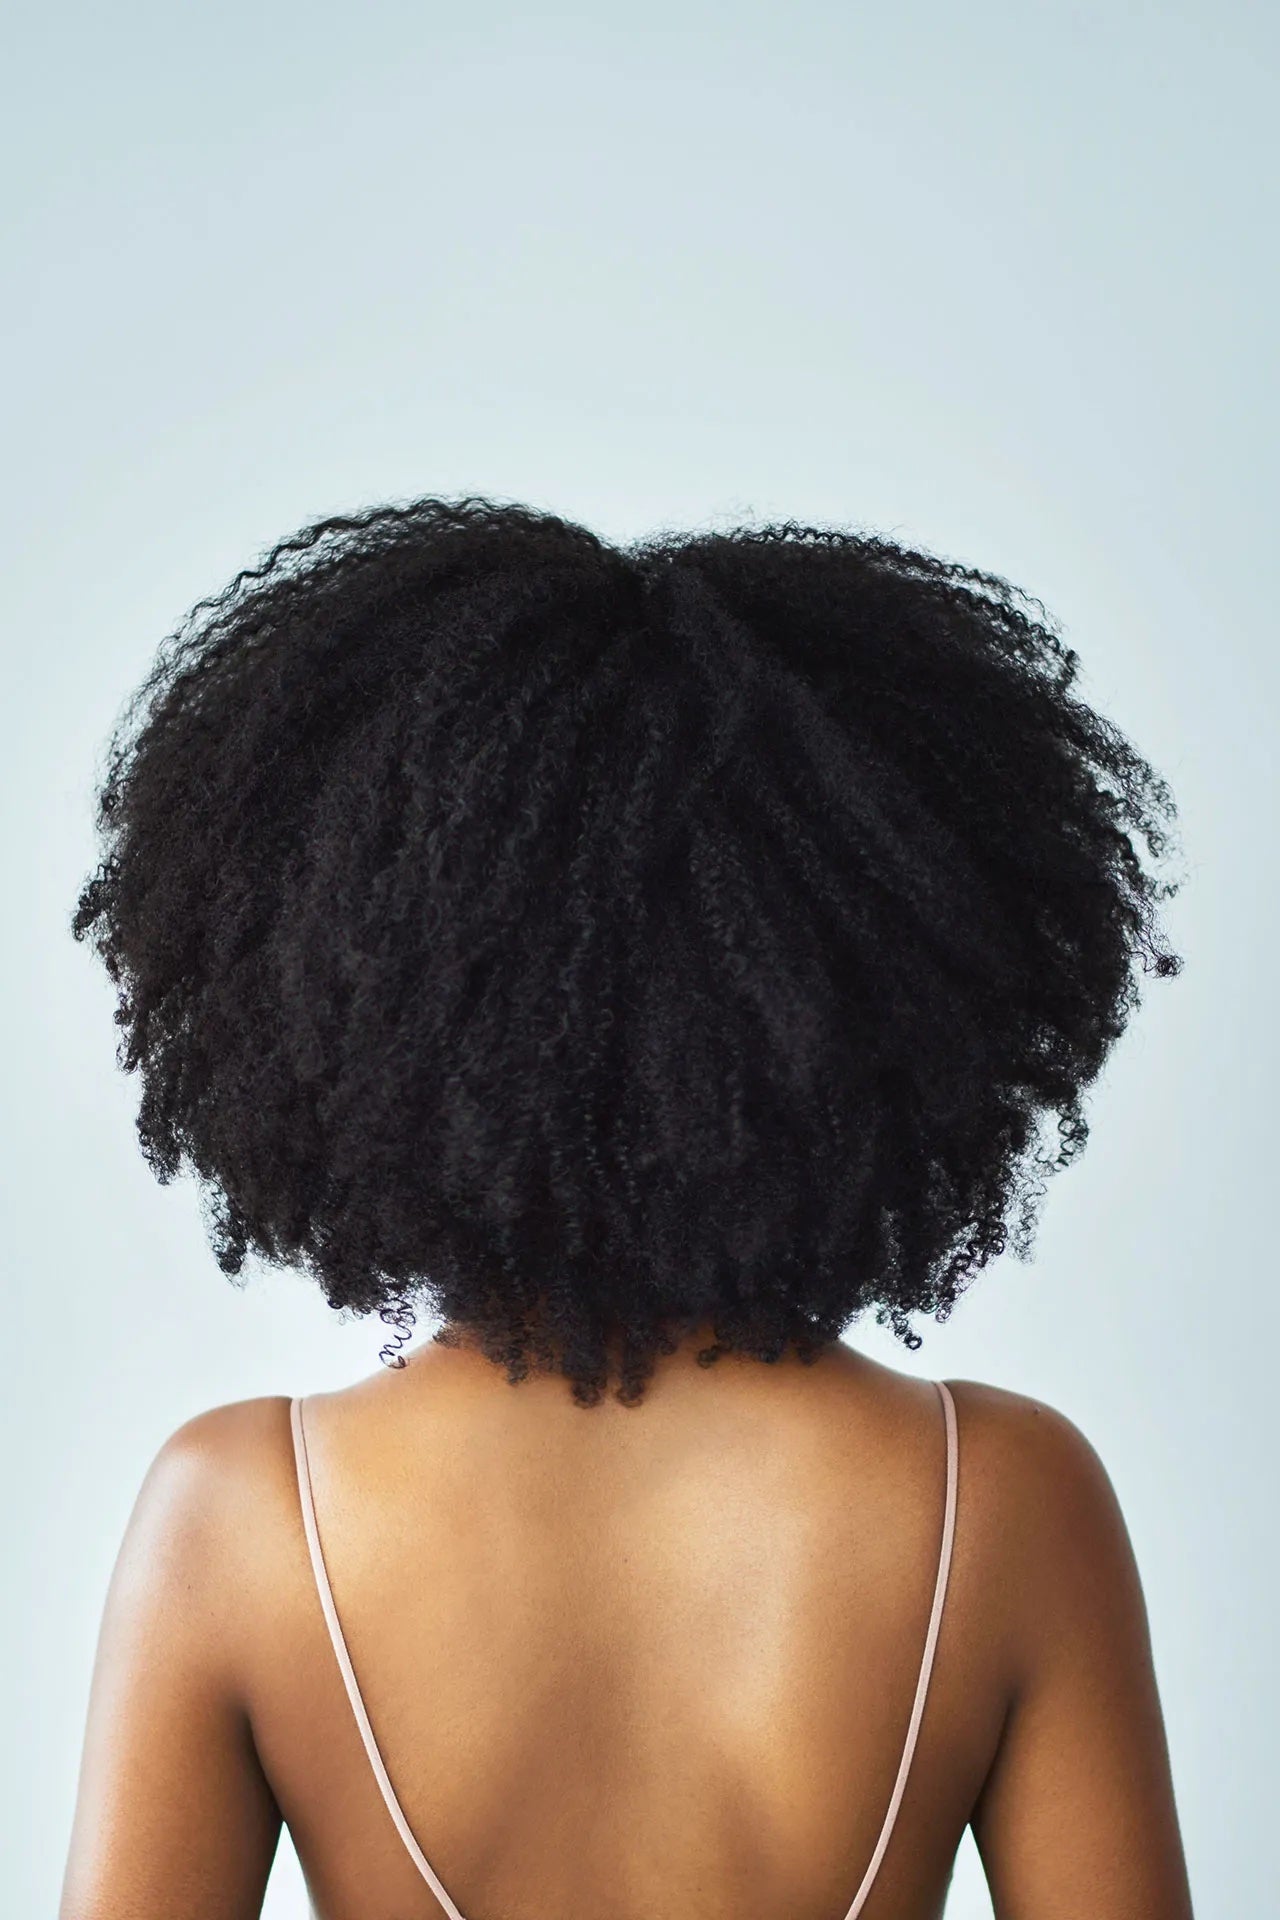 How Our Hormones Impact Our Hair